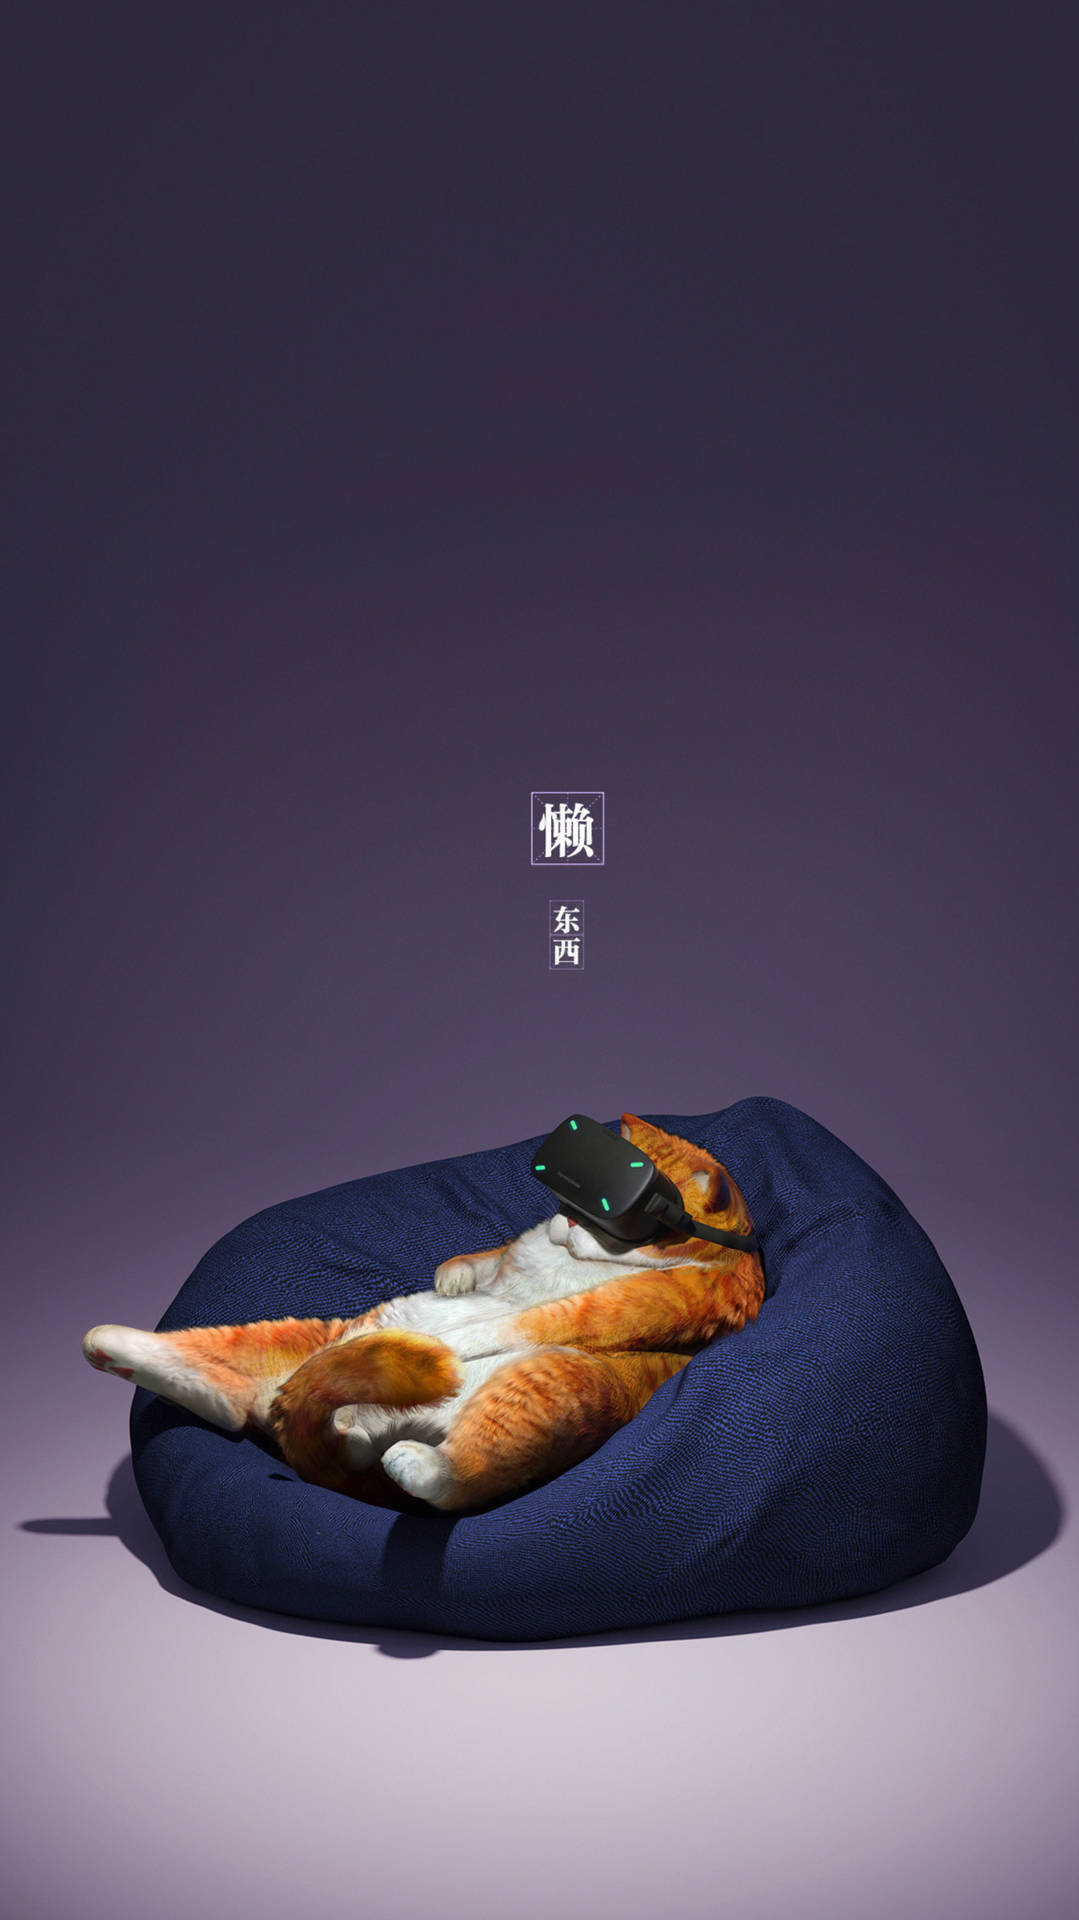 cool cat with vr glasses